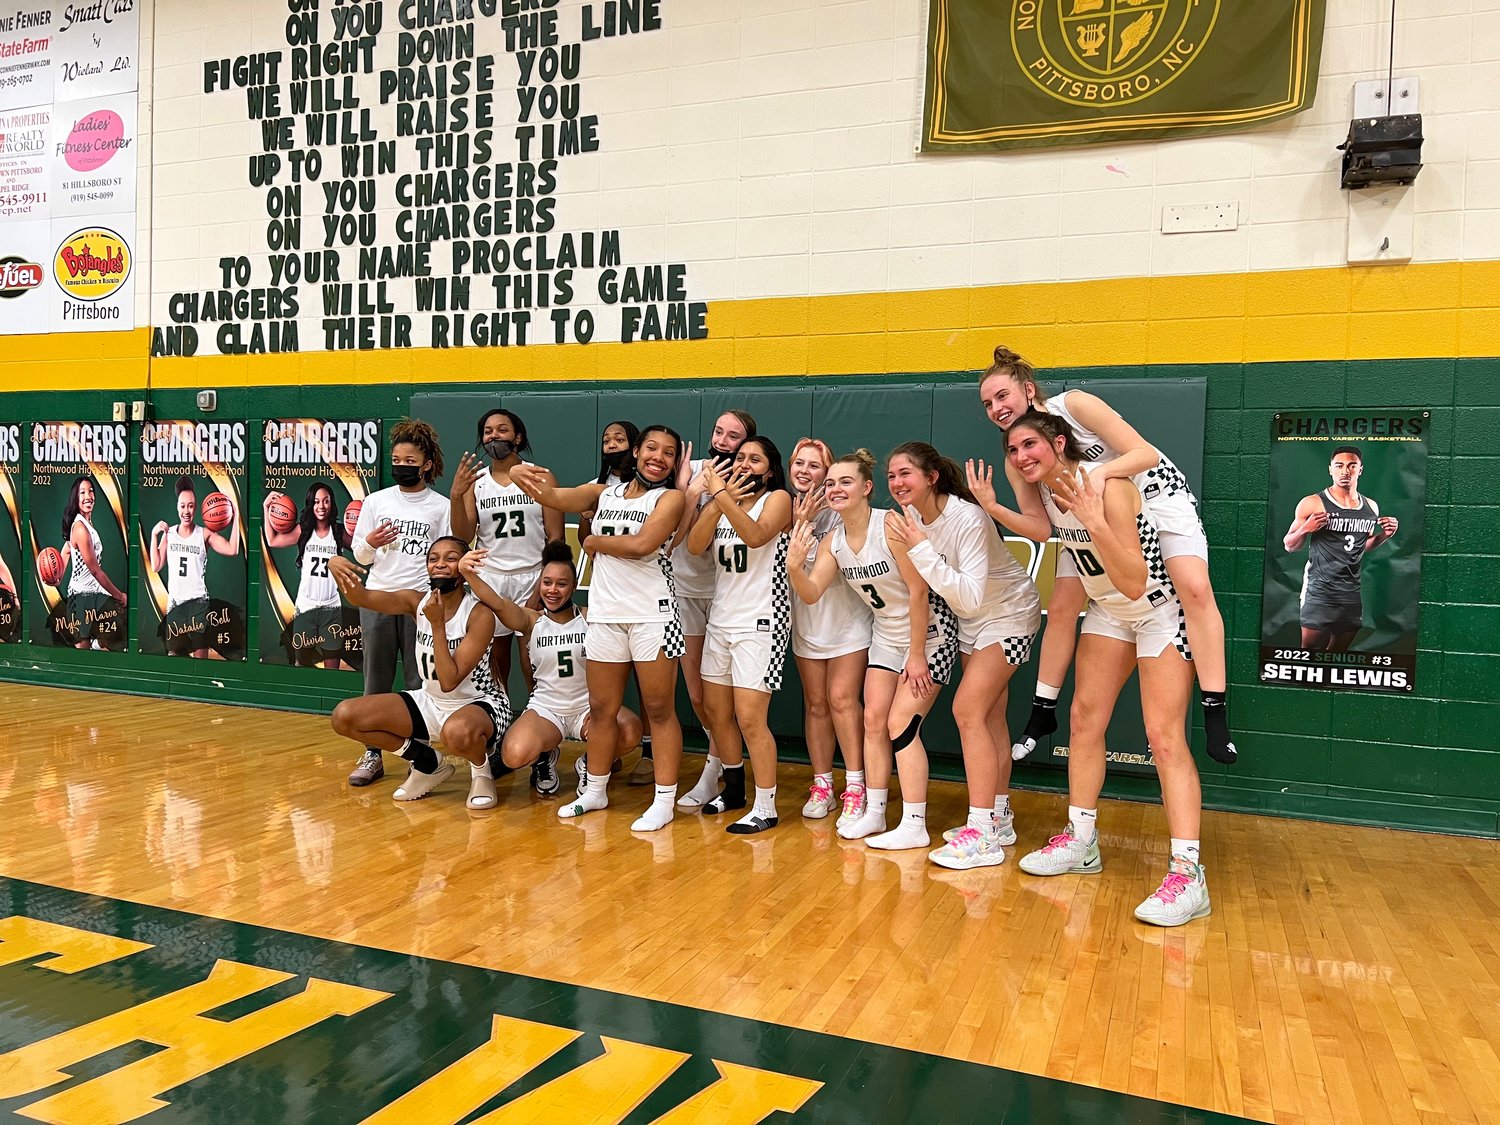 Northwood's women's basketball team poses for photos after the Chargers' 66-52 win over the Williams Bulldogs in the Elite Eight of the NCHSAA 3A playoffs on Tuesday. With the win, Northwood advanced to its second-straight Final Four.